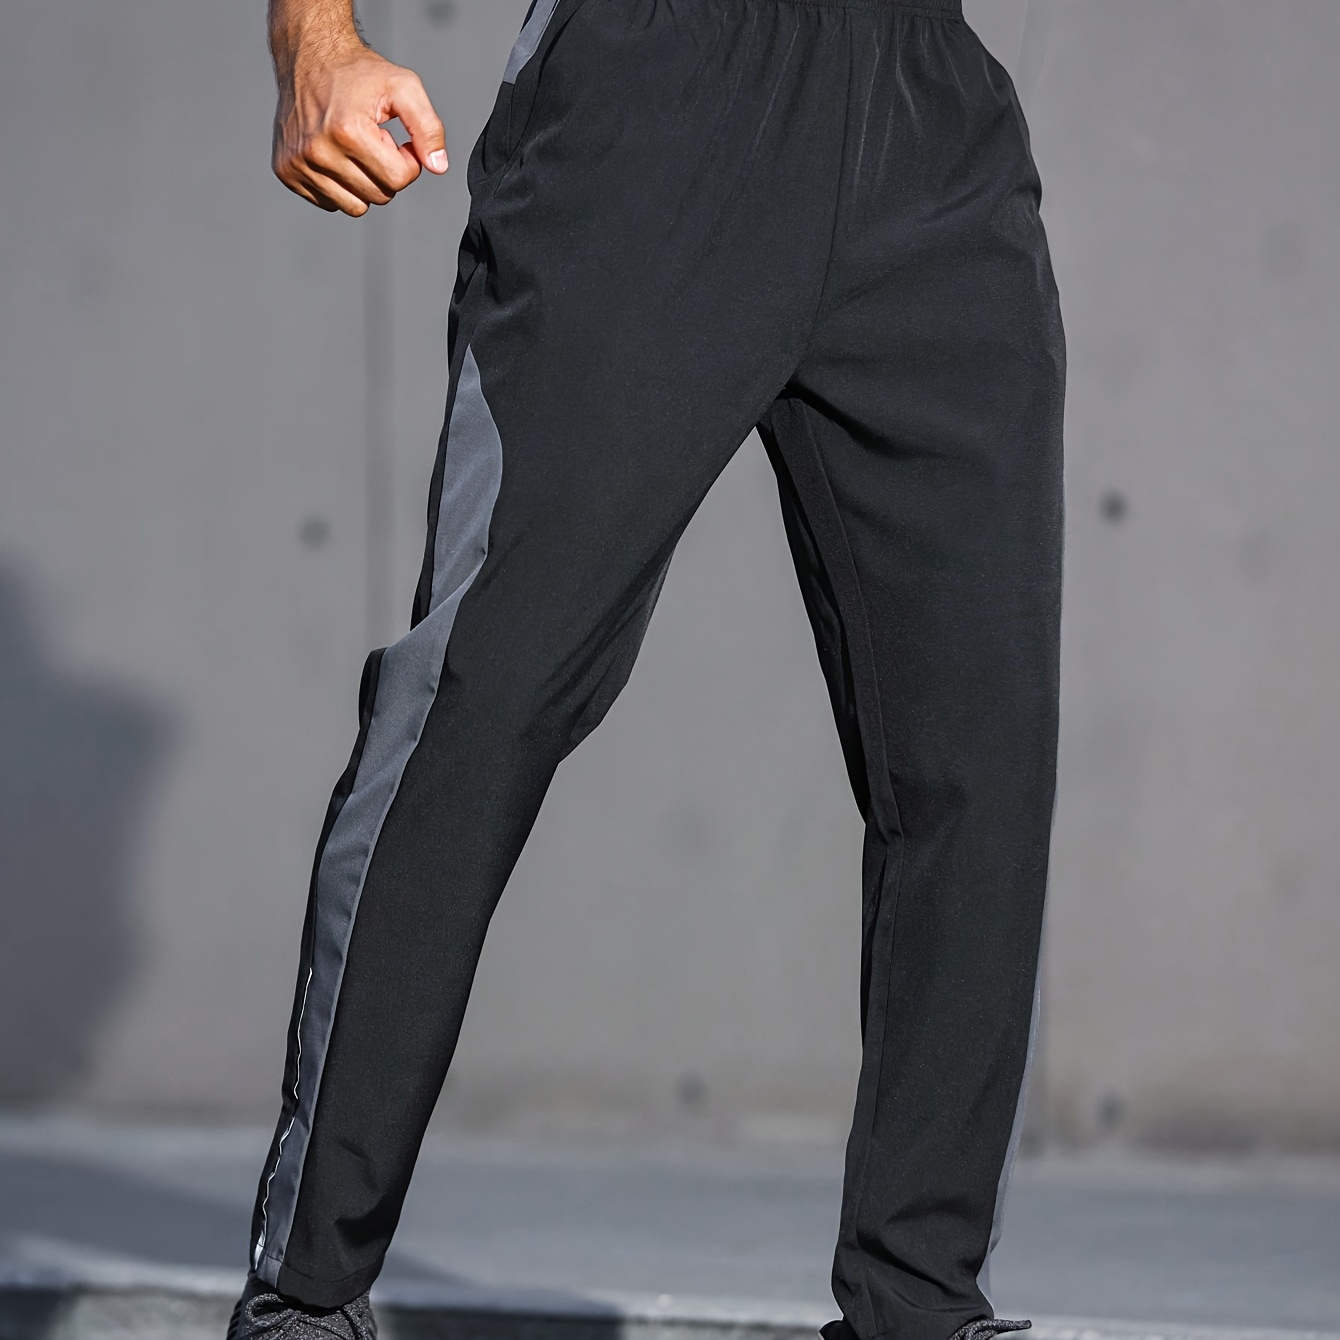 

1pc, Men's Contrast Color Sports Pants With Elastic Waistband And Pockets, Versatile And Chic Trousers For Outdoors And Sports Wear